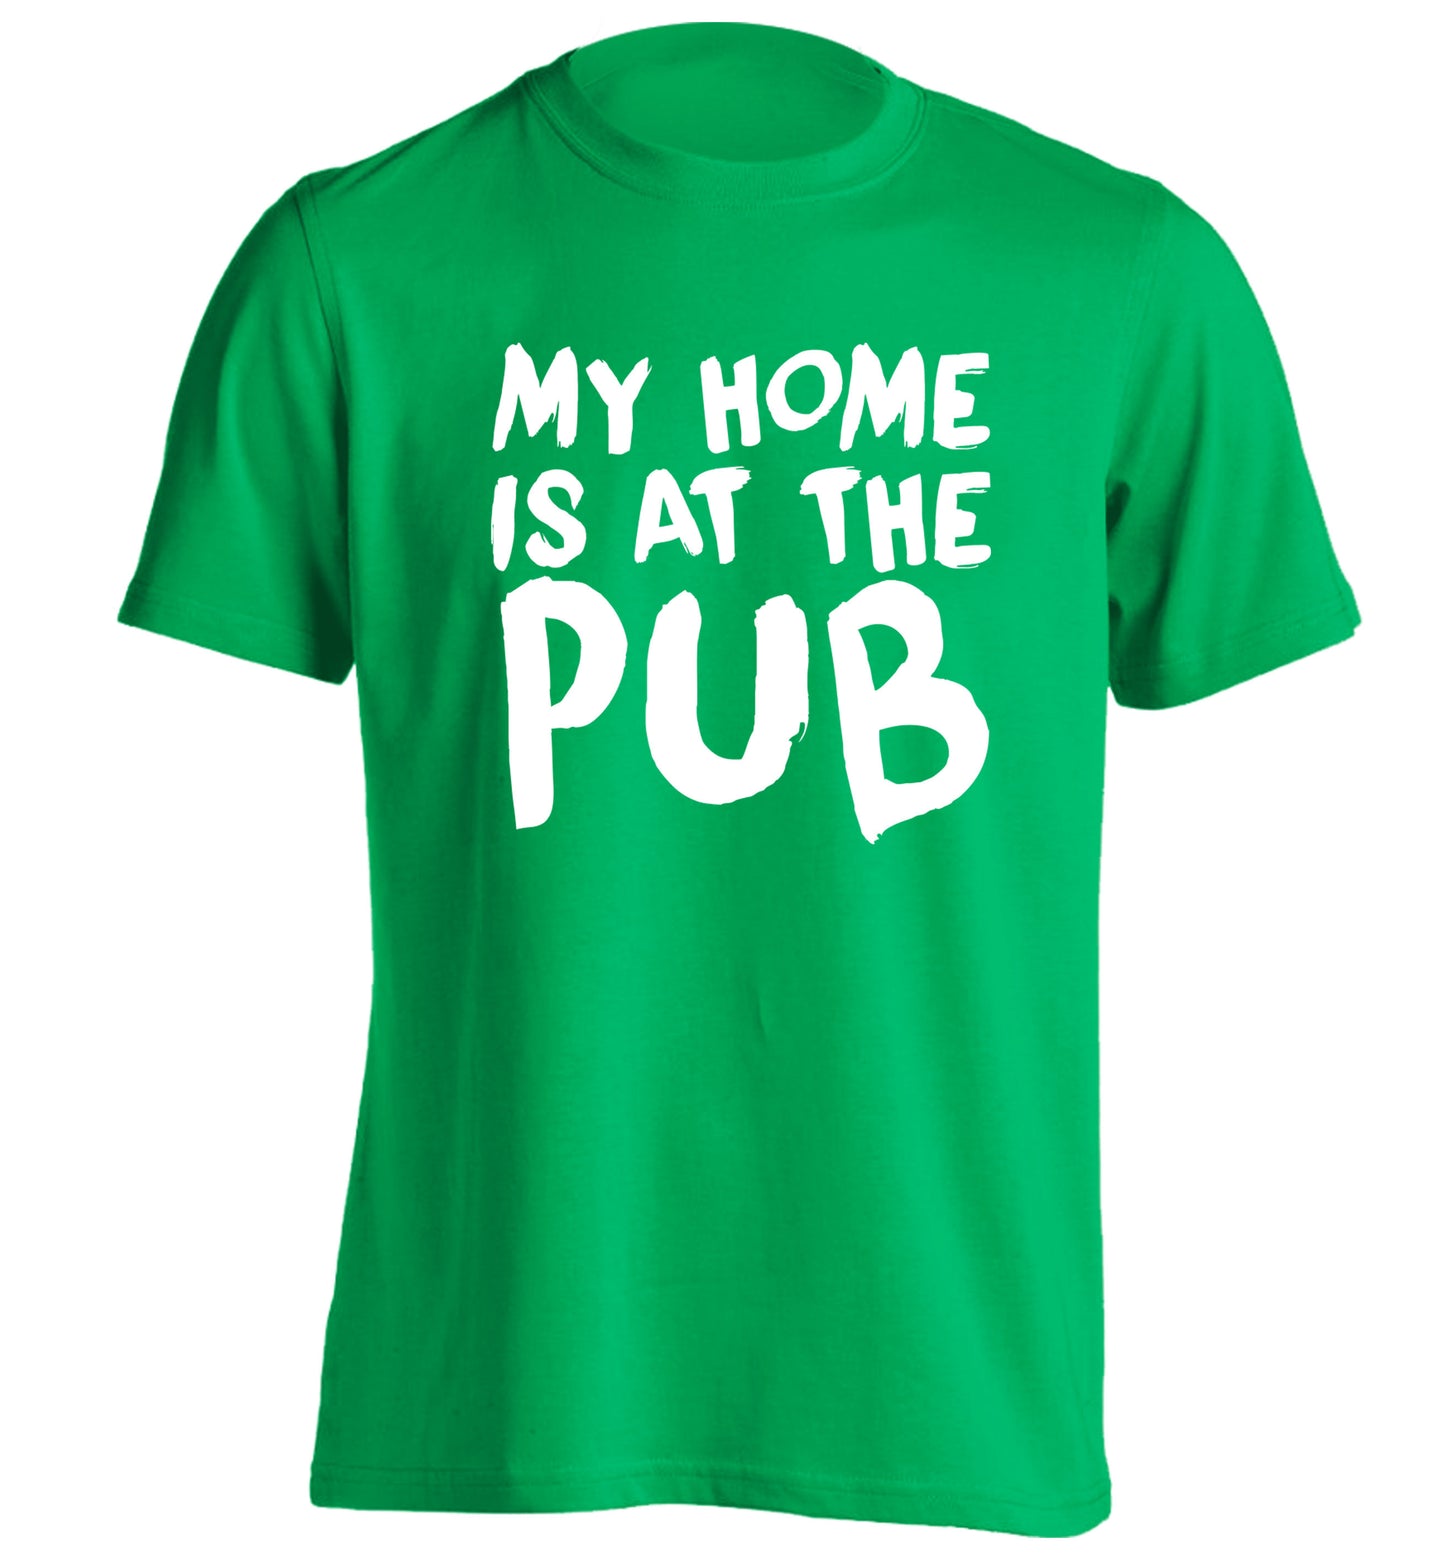 My home is at the pub adults unisex green Tshirt 2XL